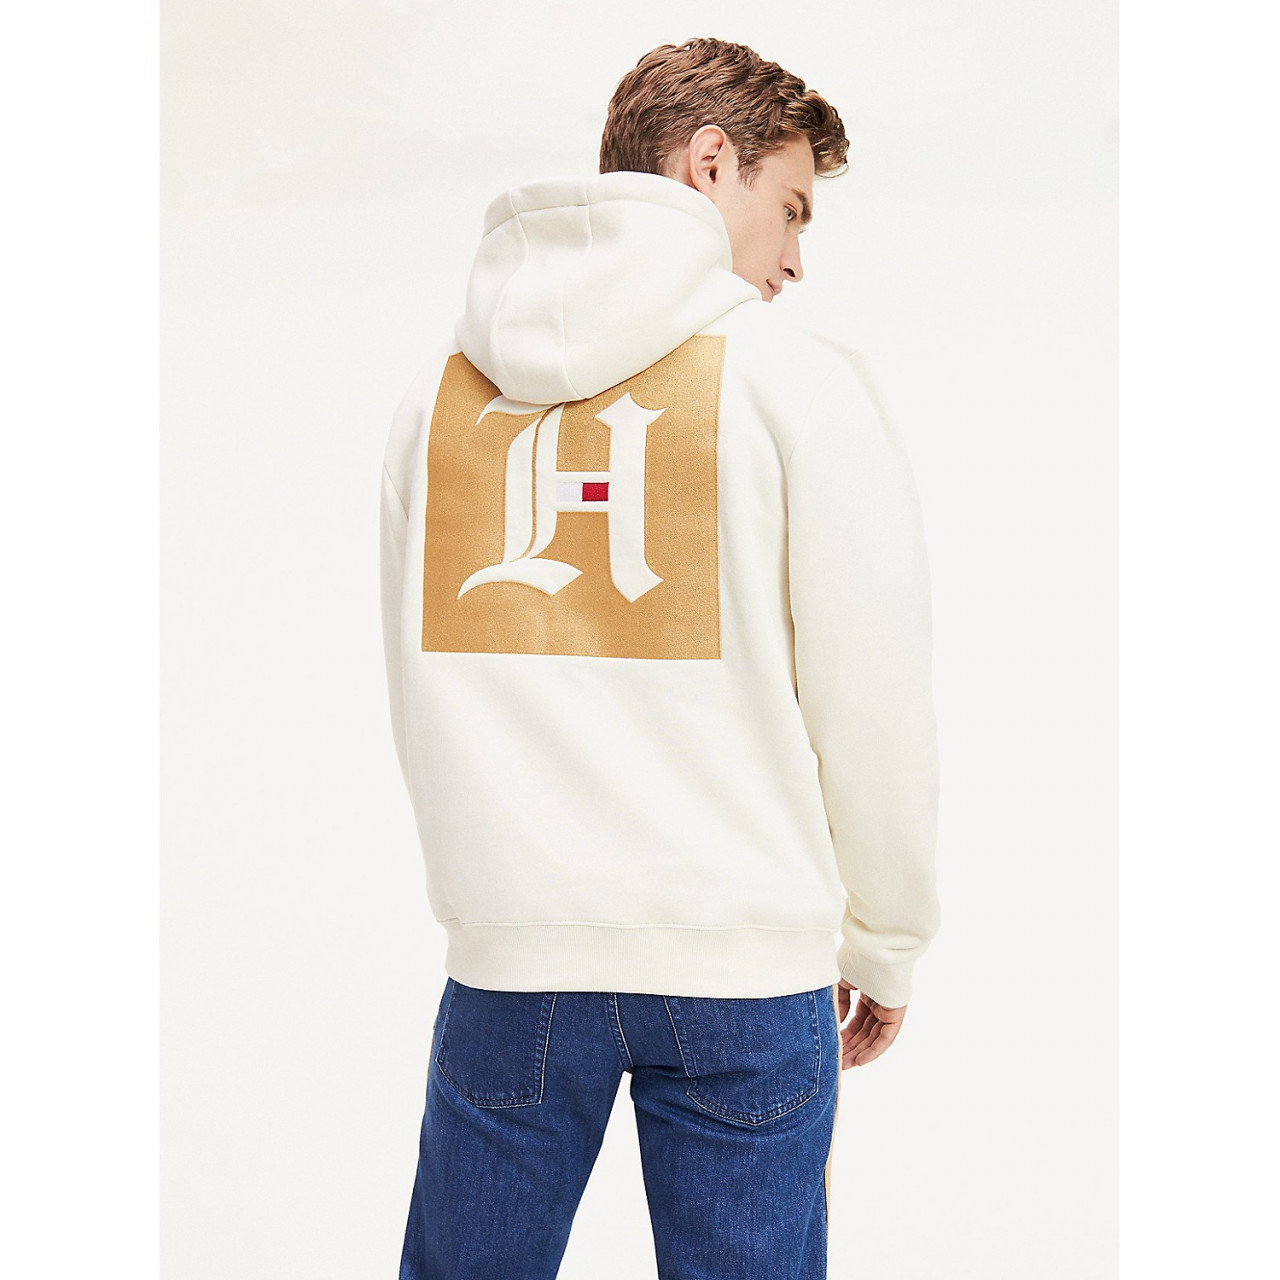 Tommy Hilfiger Lewis Hamilton Limited Edition Hoodie - White